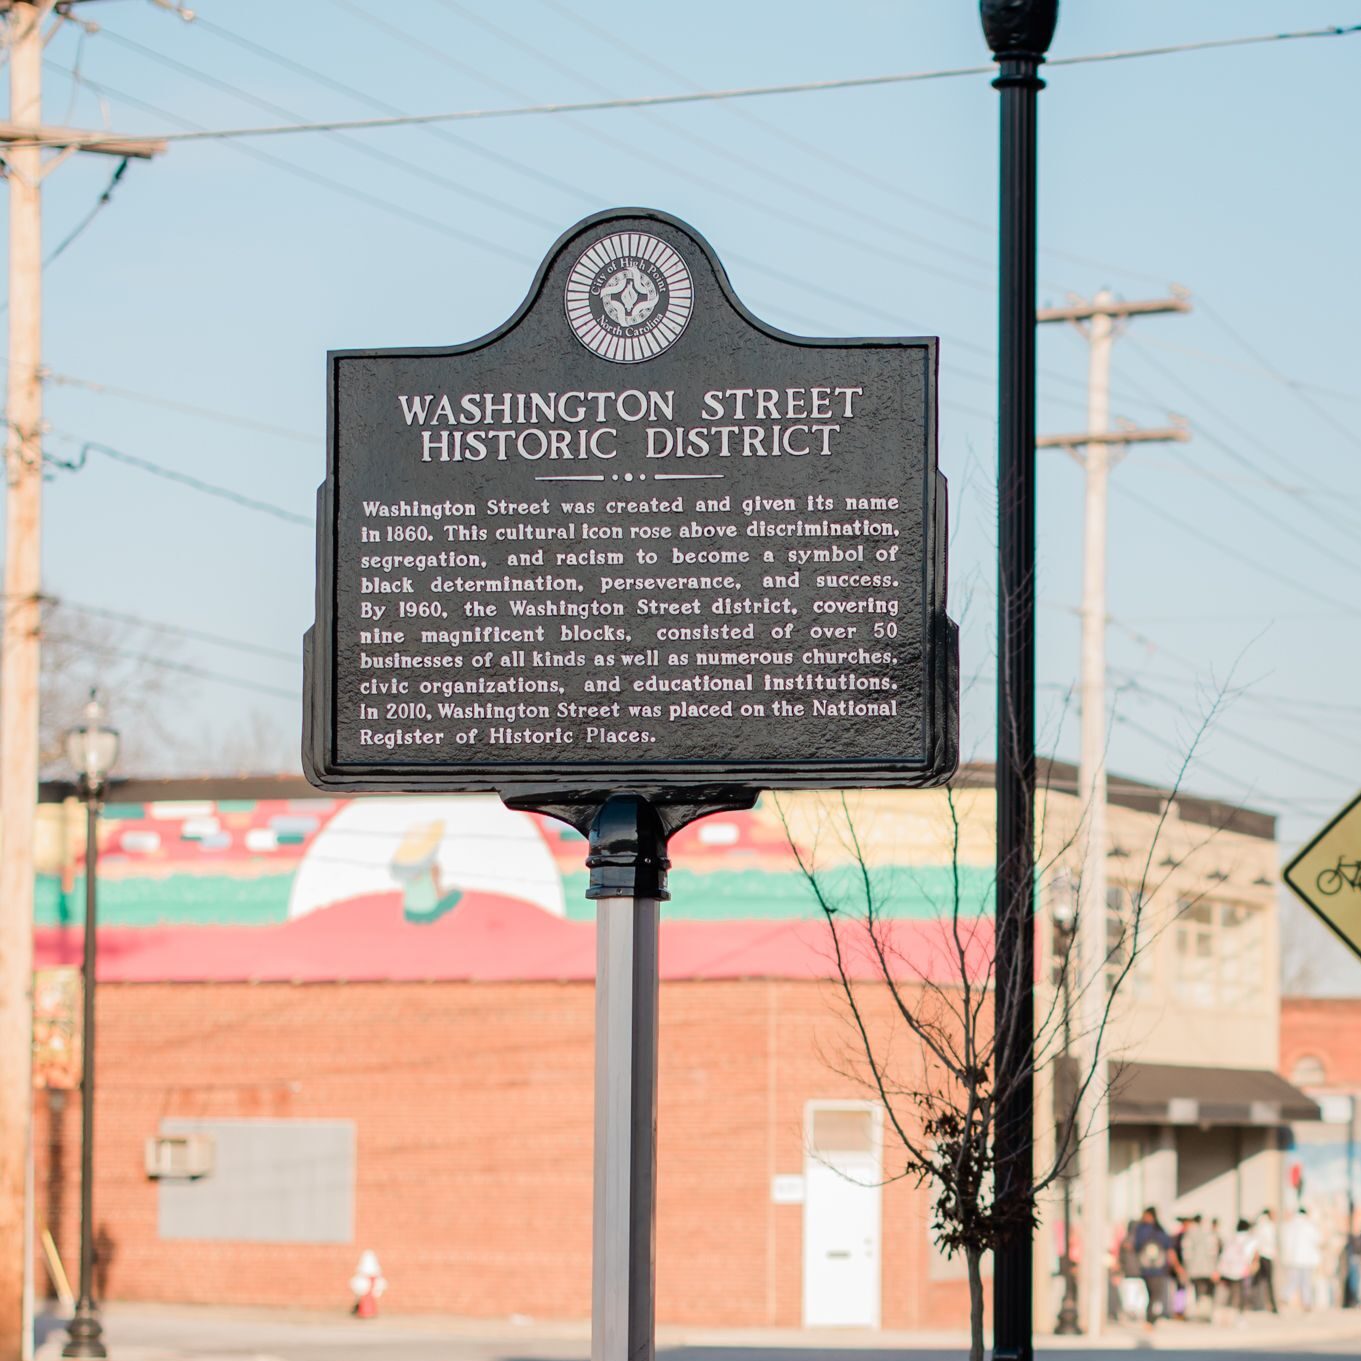 A historic sign marker stands on Washington Street in High Point, NC.